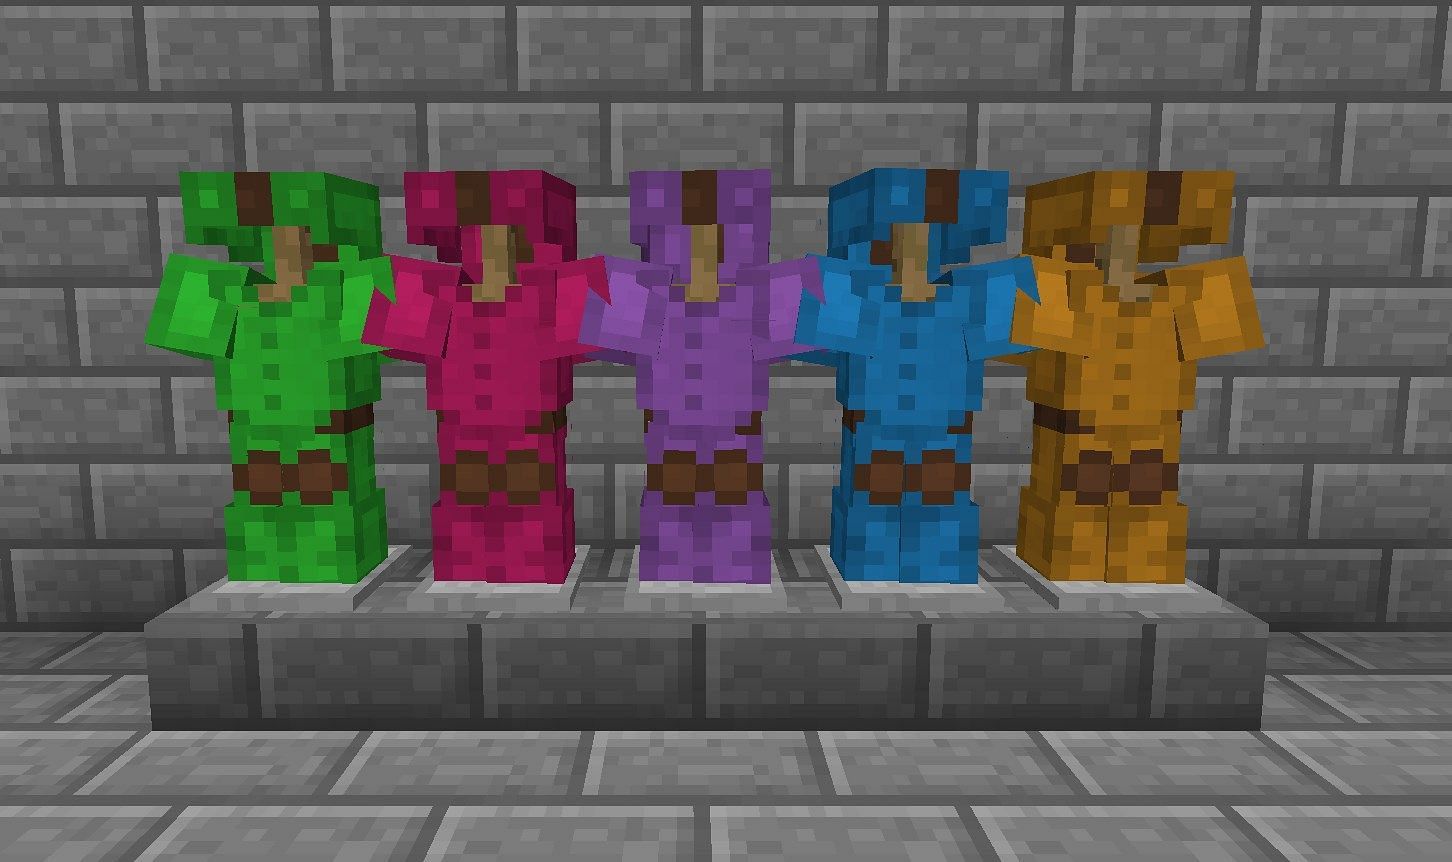 Sets of dyed leather armor (Image via Minecraft)